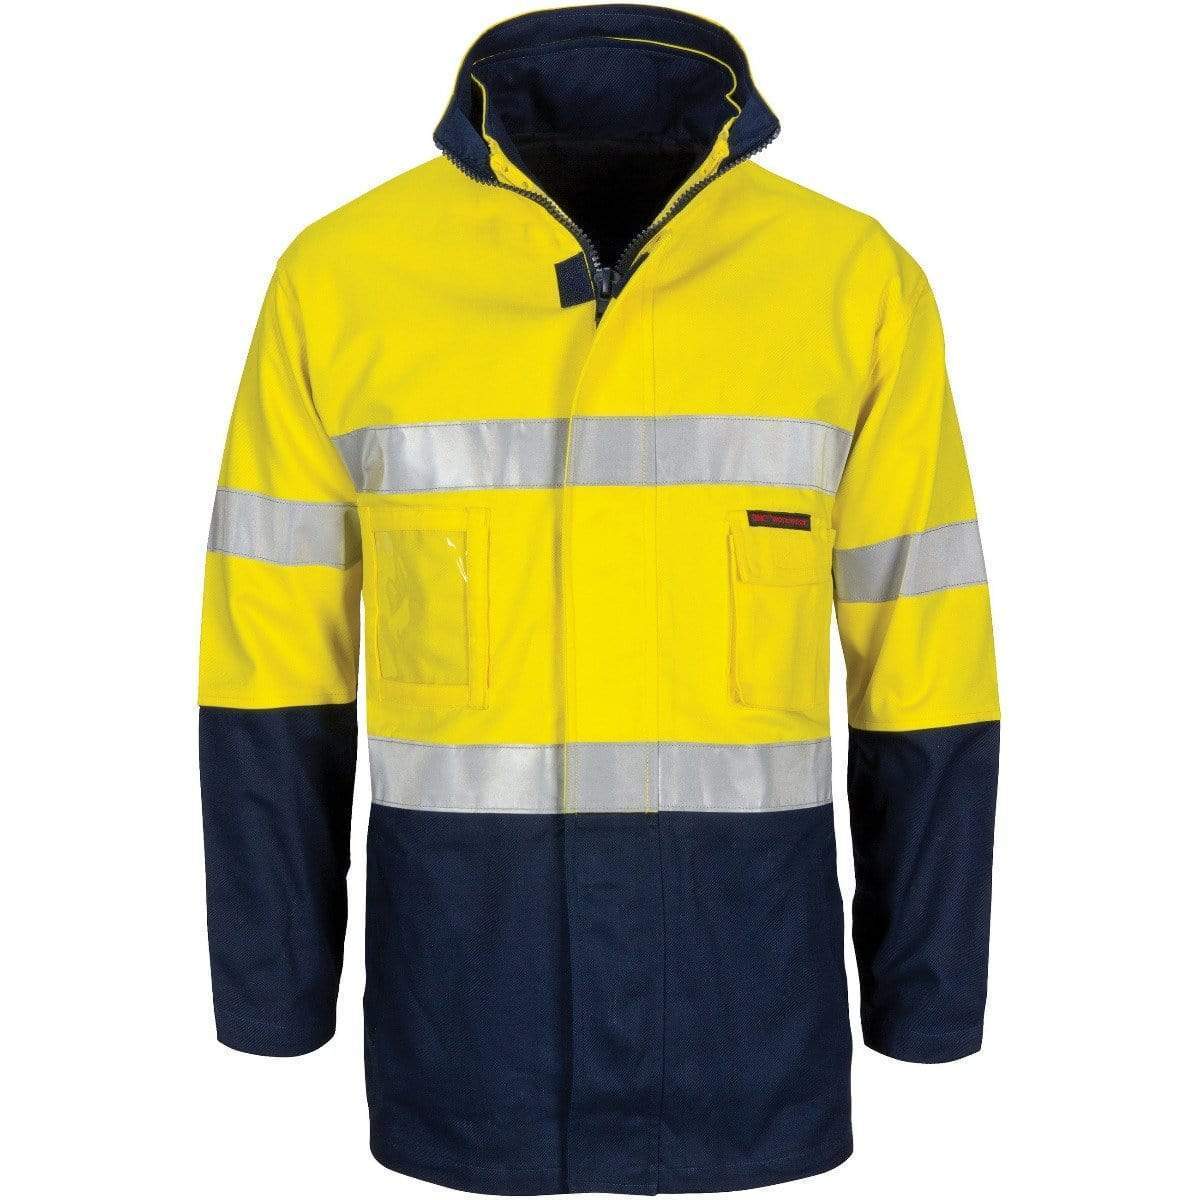 Dnc Workwear Hi-vis 4-in-1 Cotton Drill Jacket With Generic Reflective Tape - 3764 Work Wear DNC Workwear Yellow/Navy XS 